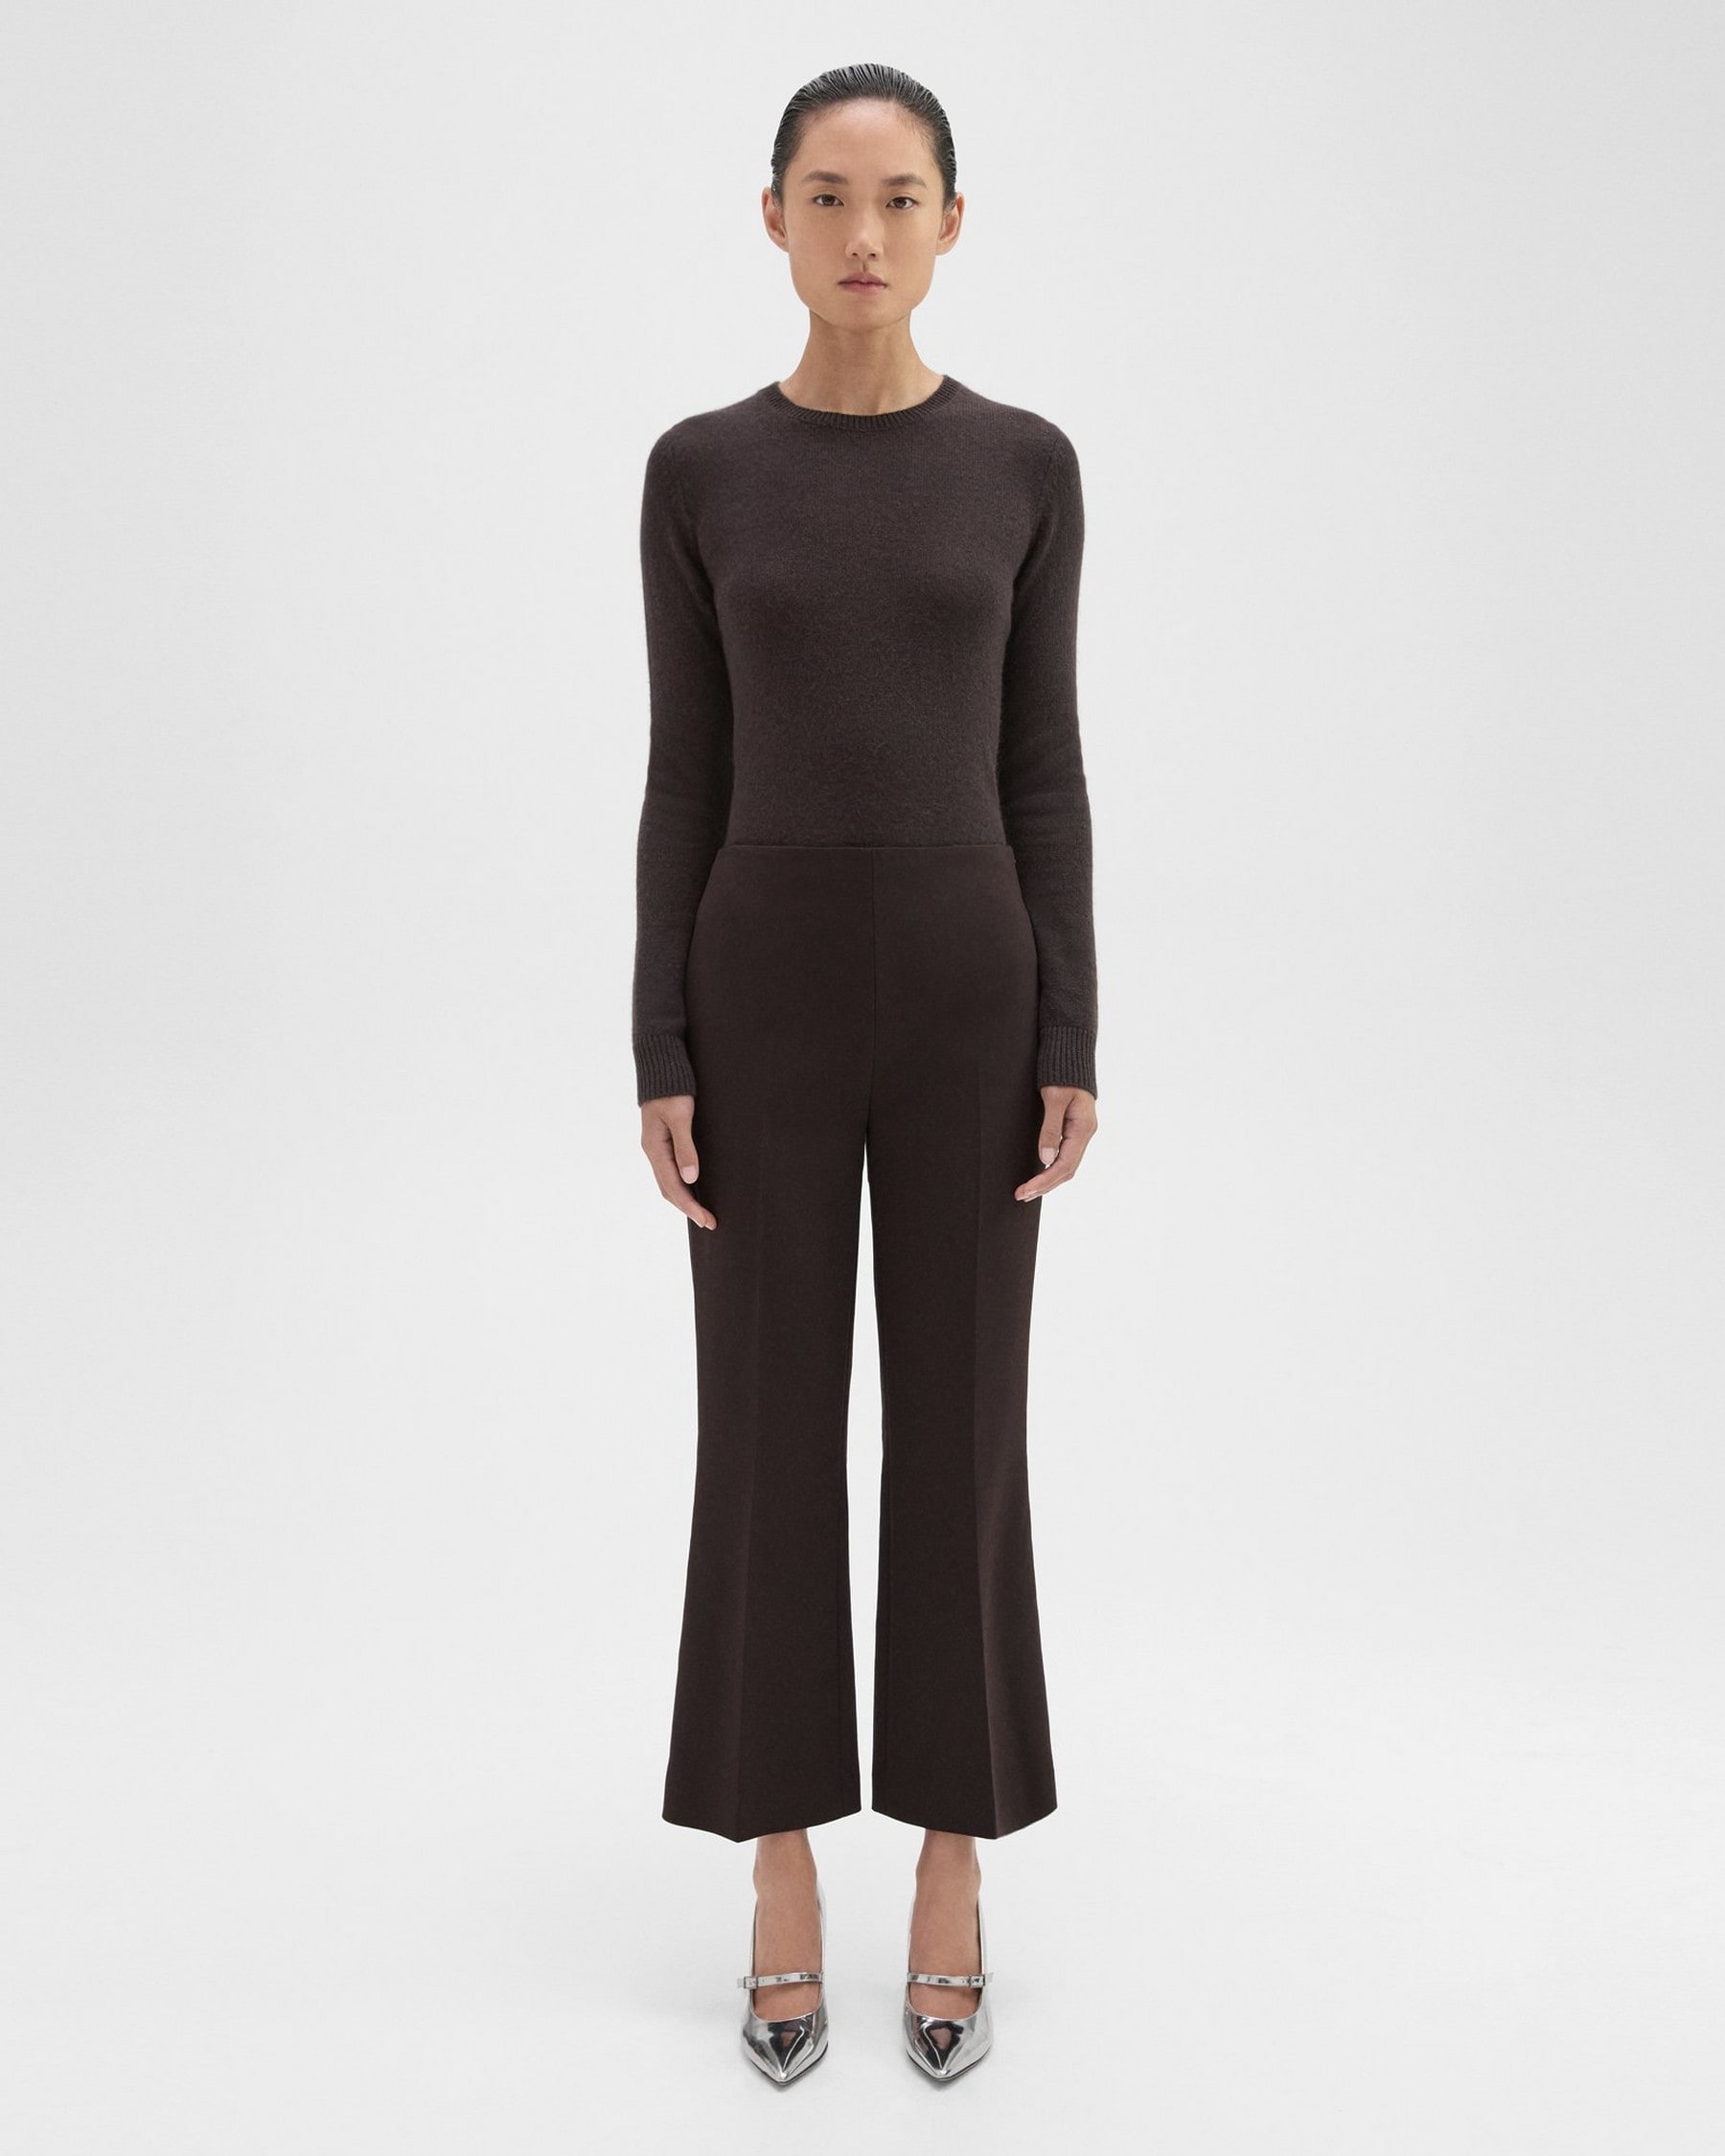 Theory Cropped Kick Pant in Double Weave